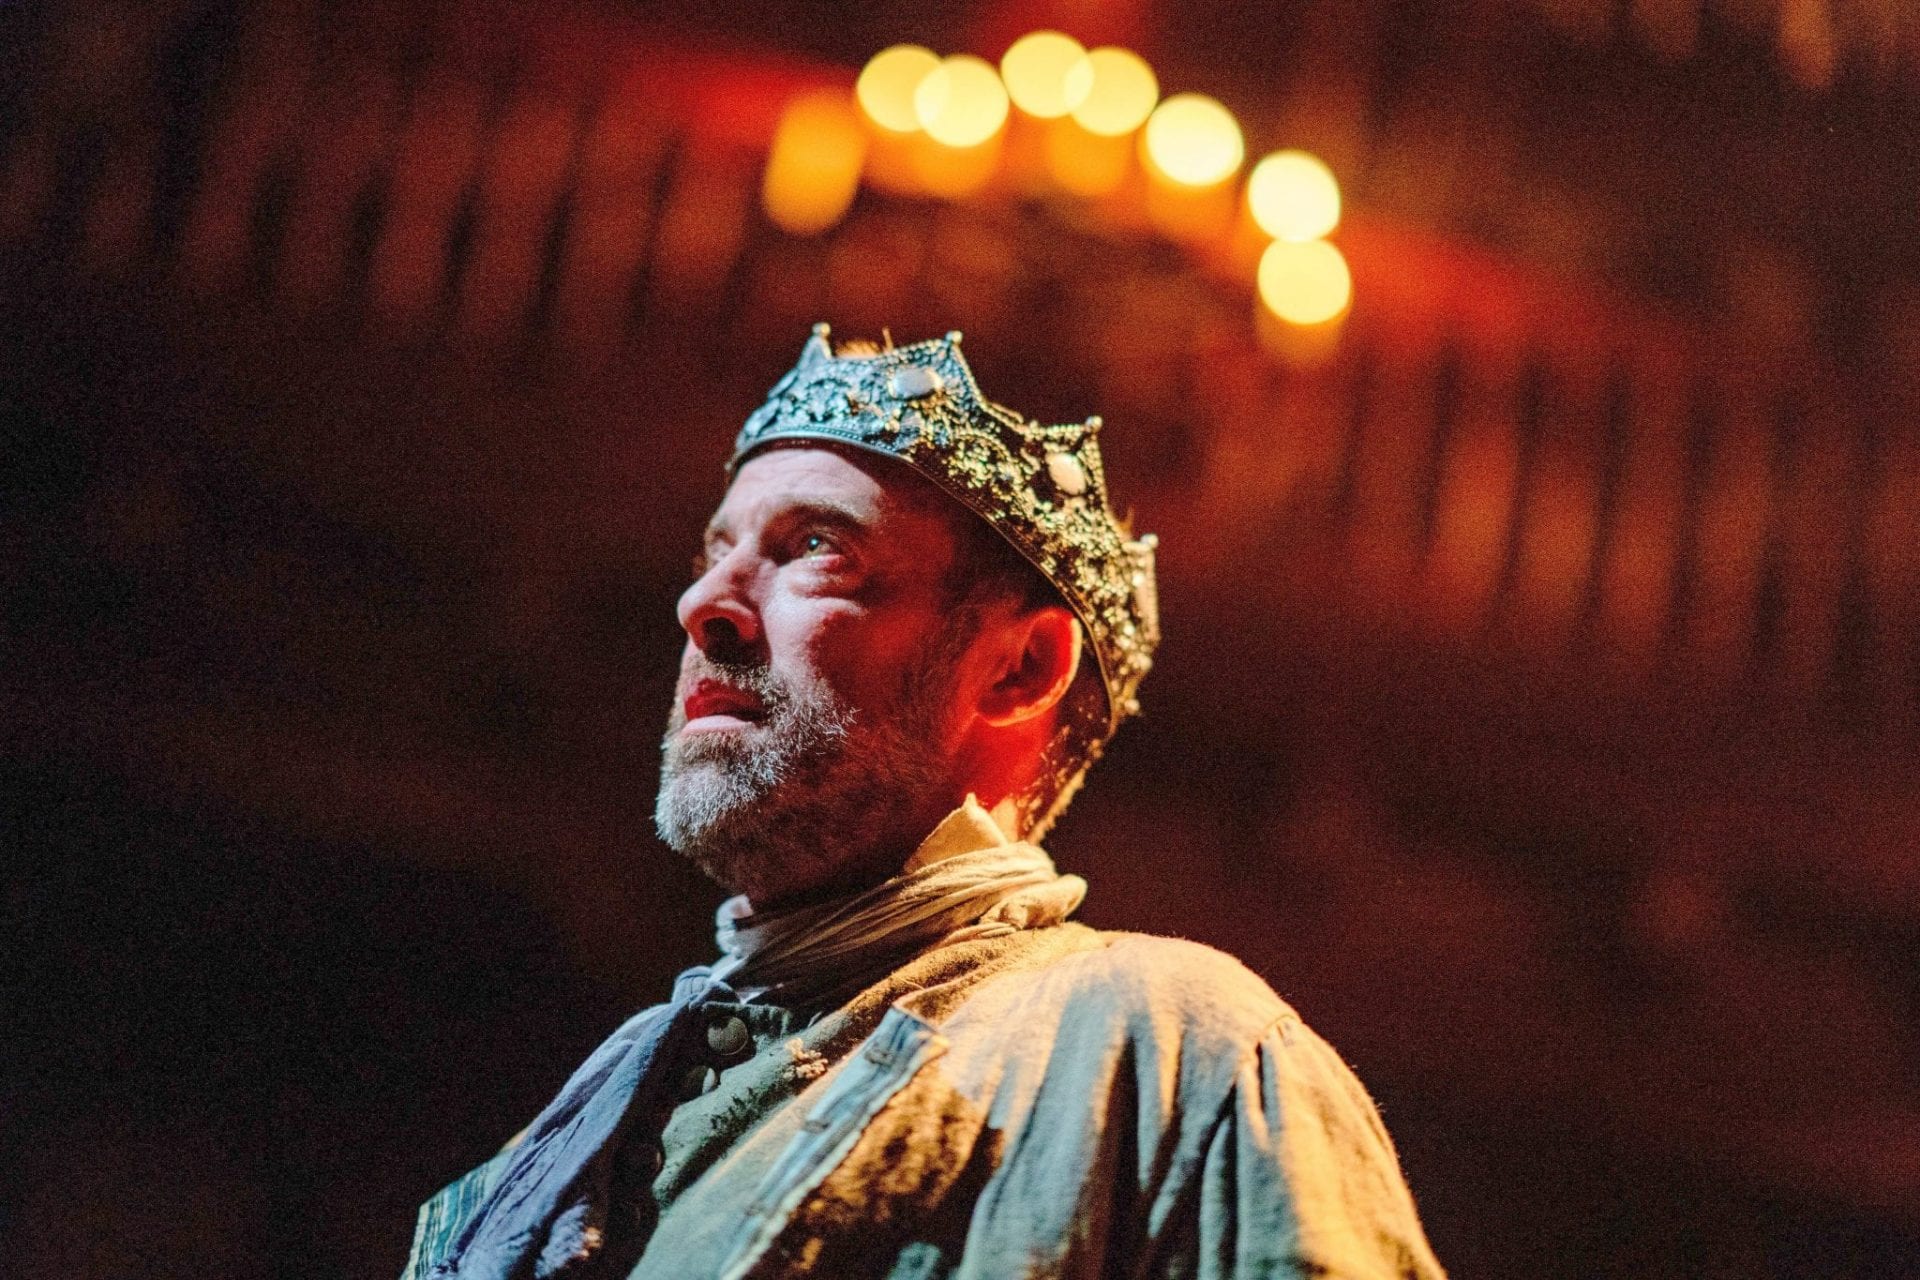 king macbeth stands under candles